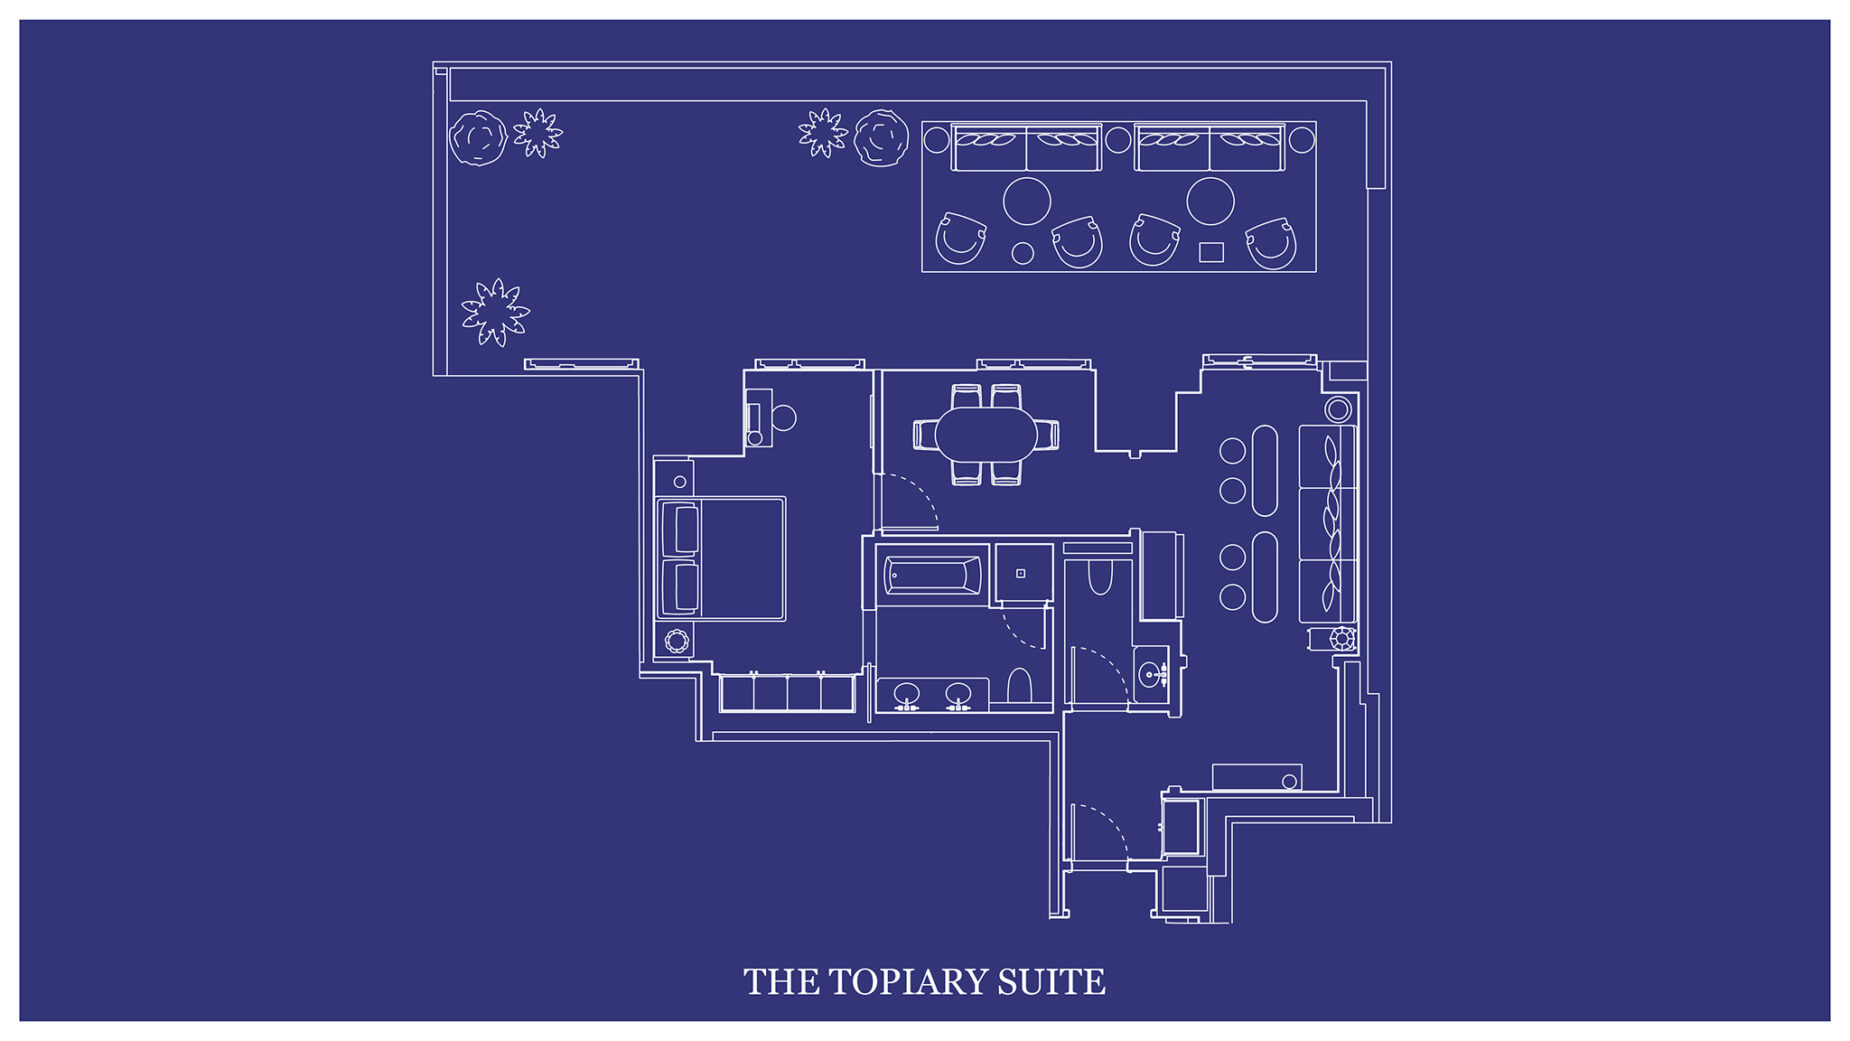 The architectural layout of "THE TOPIARY SUITE" is depicted on a blueprint map.